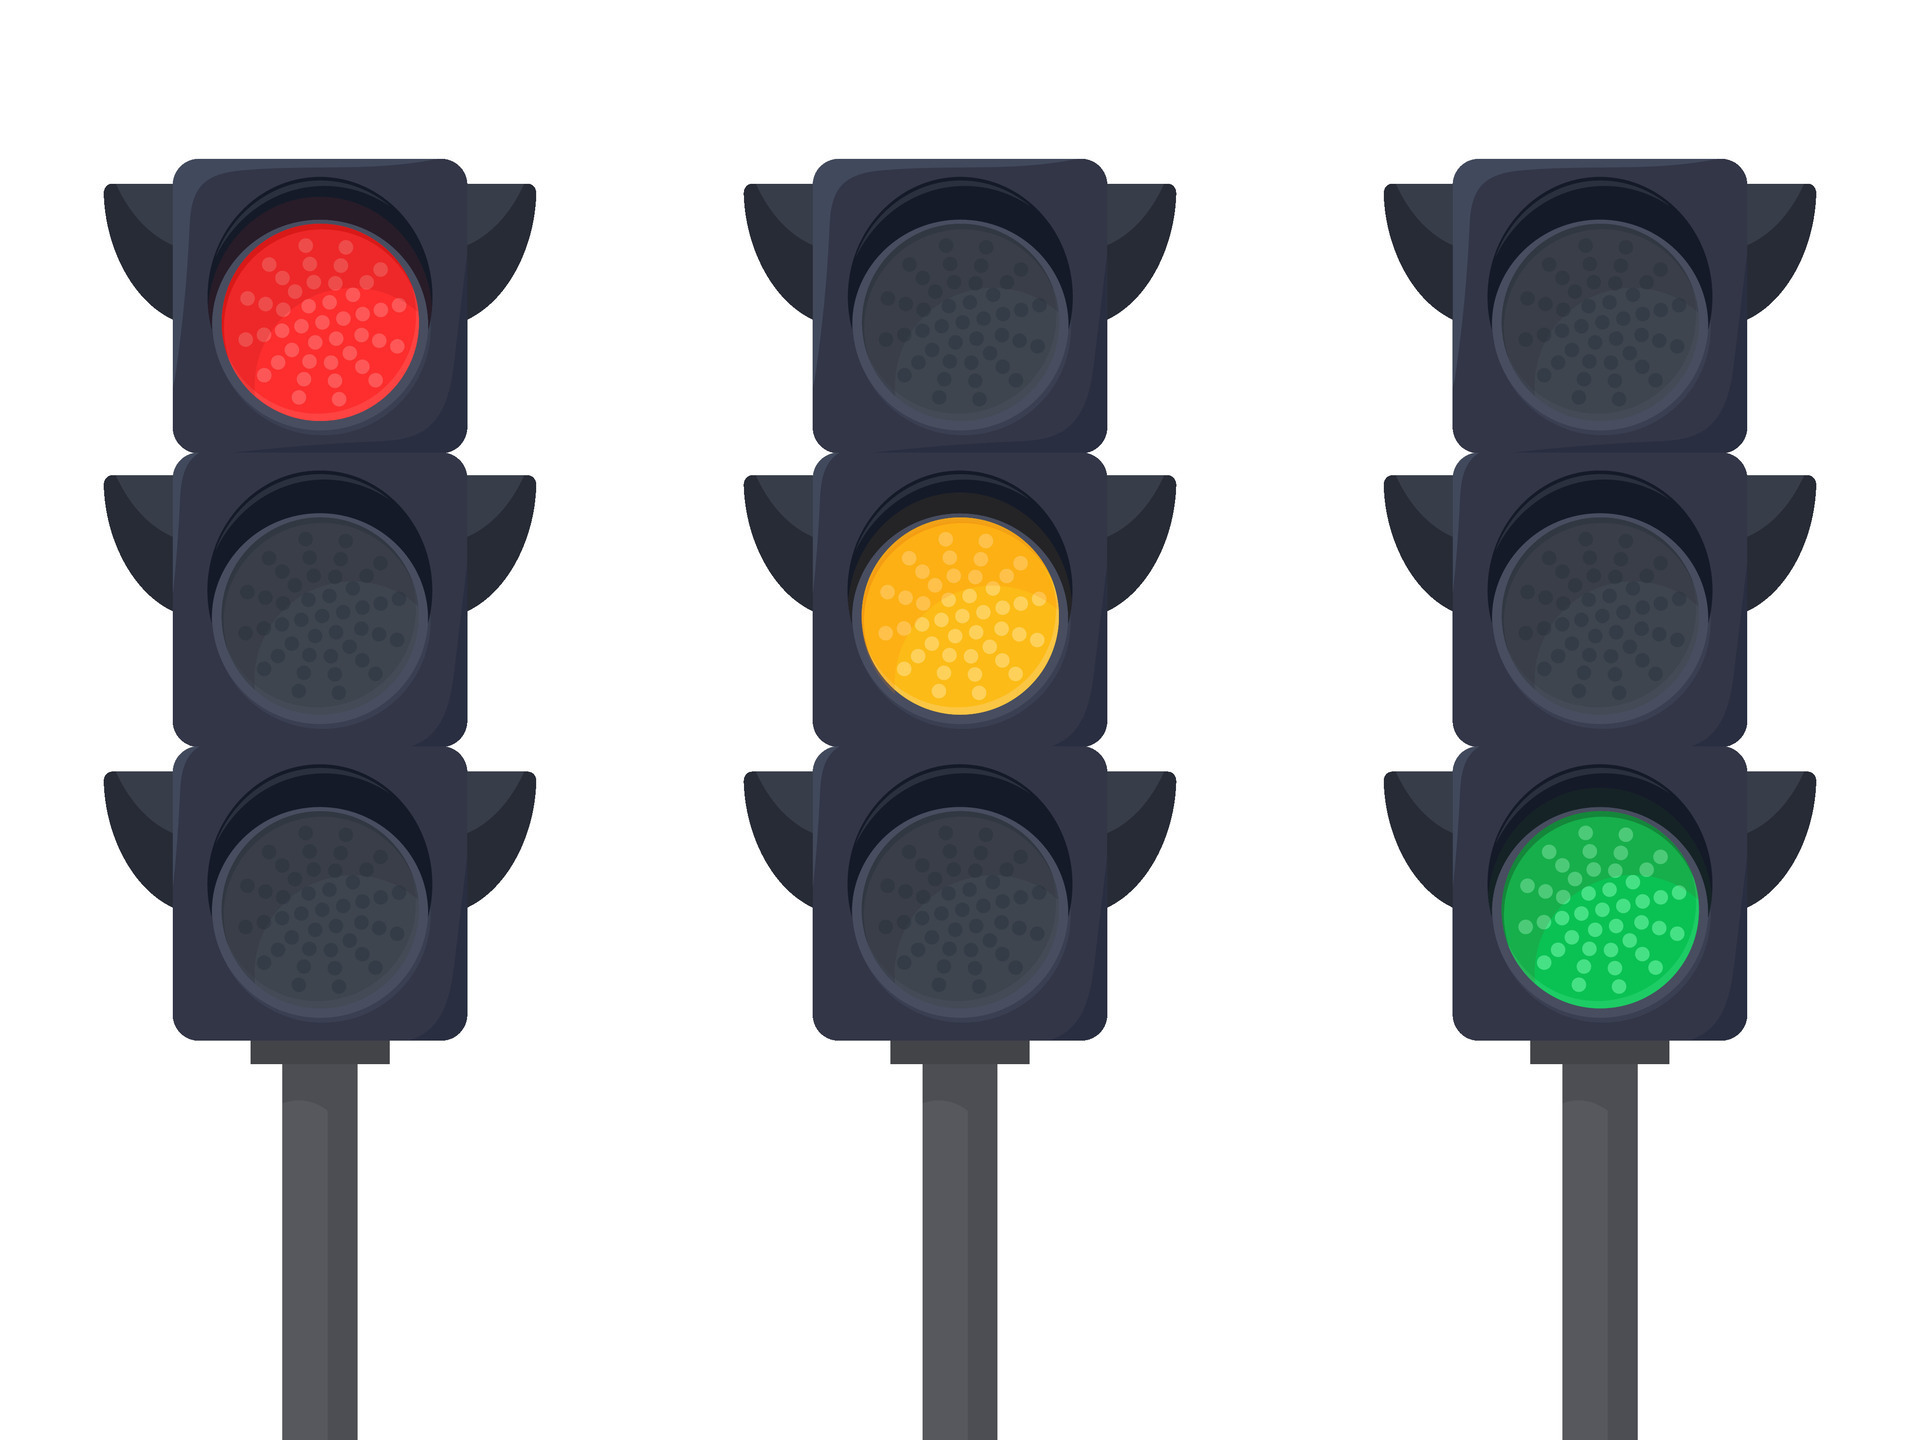 Next Stop, Innovation: How Adding a White Light to Traffic Signals Could Change Driving Forever